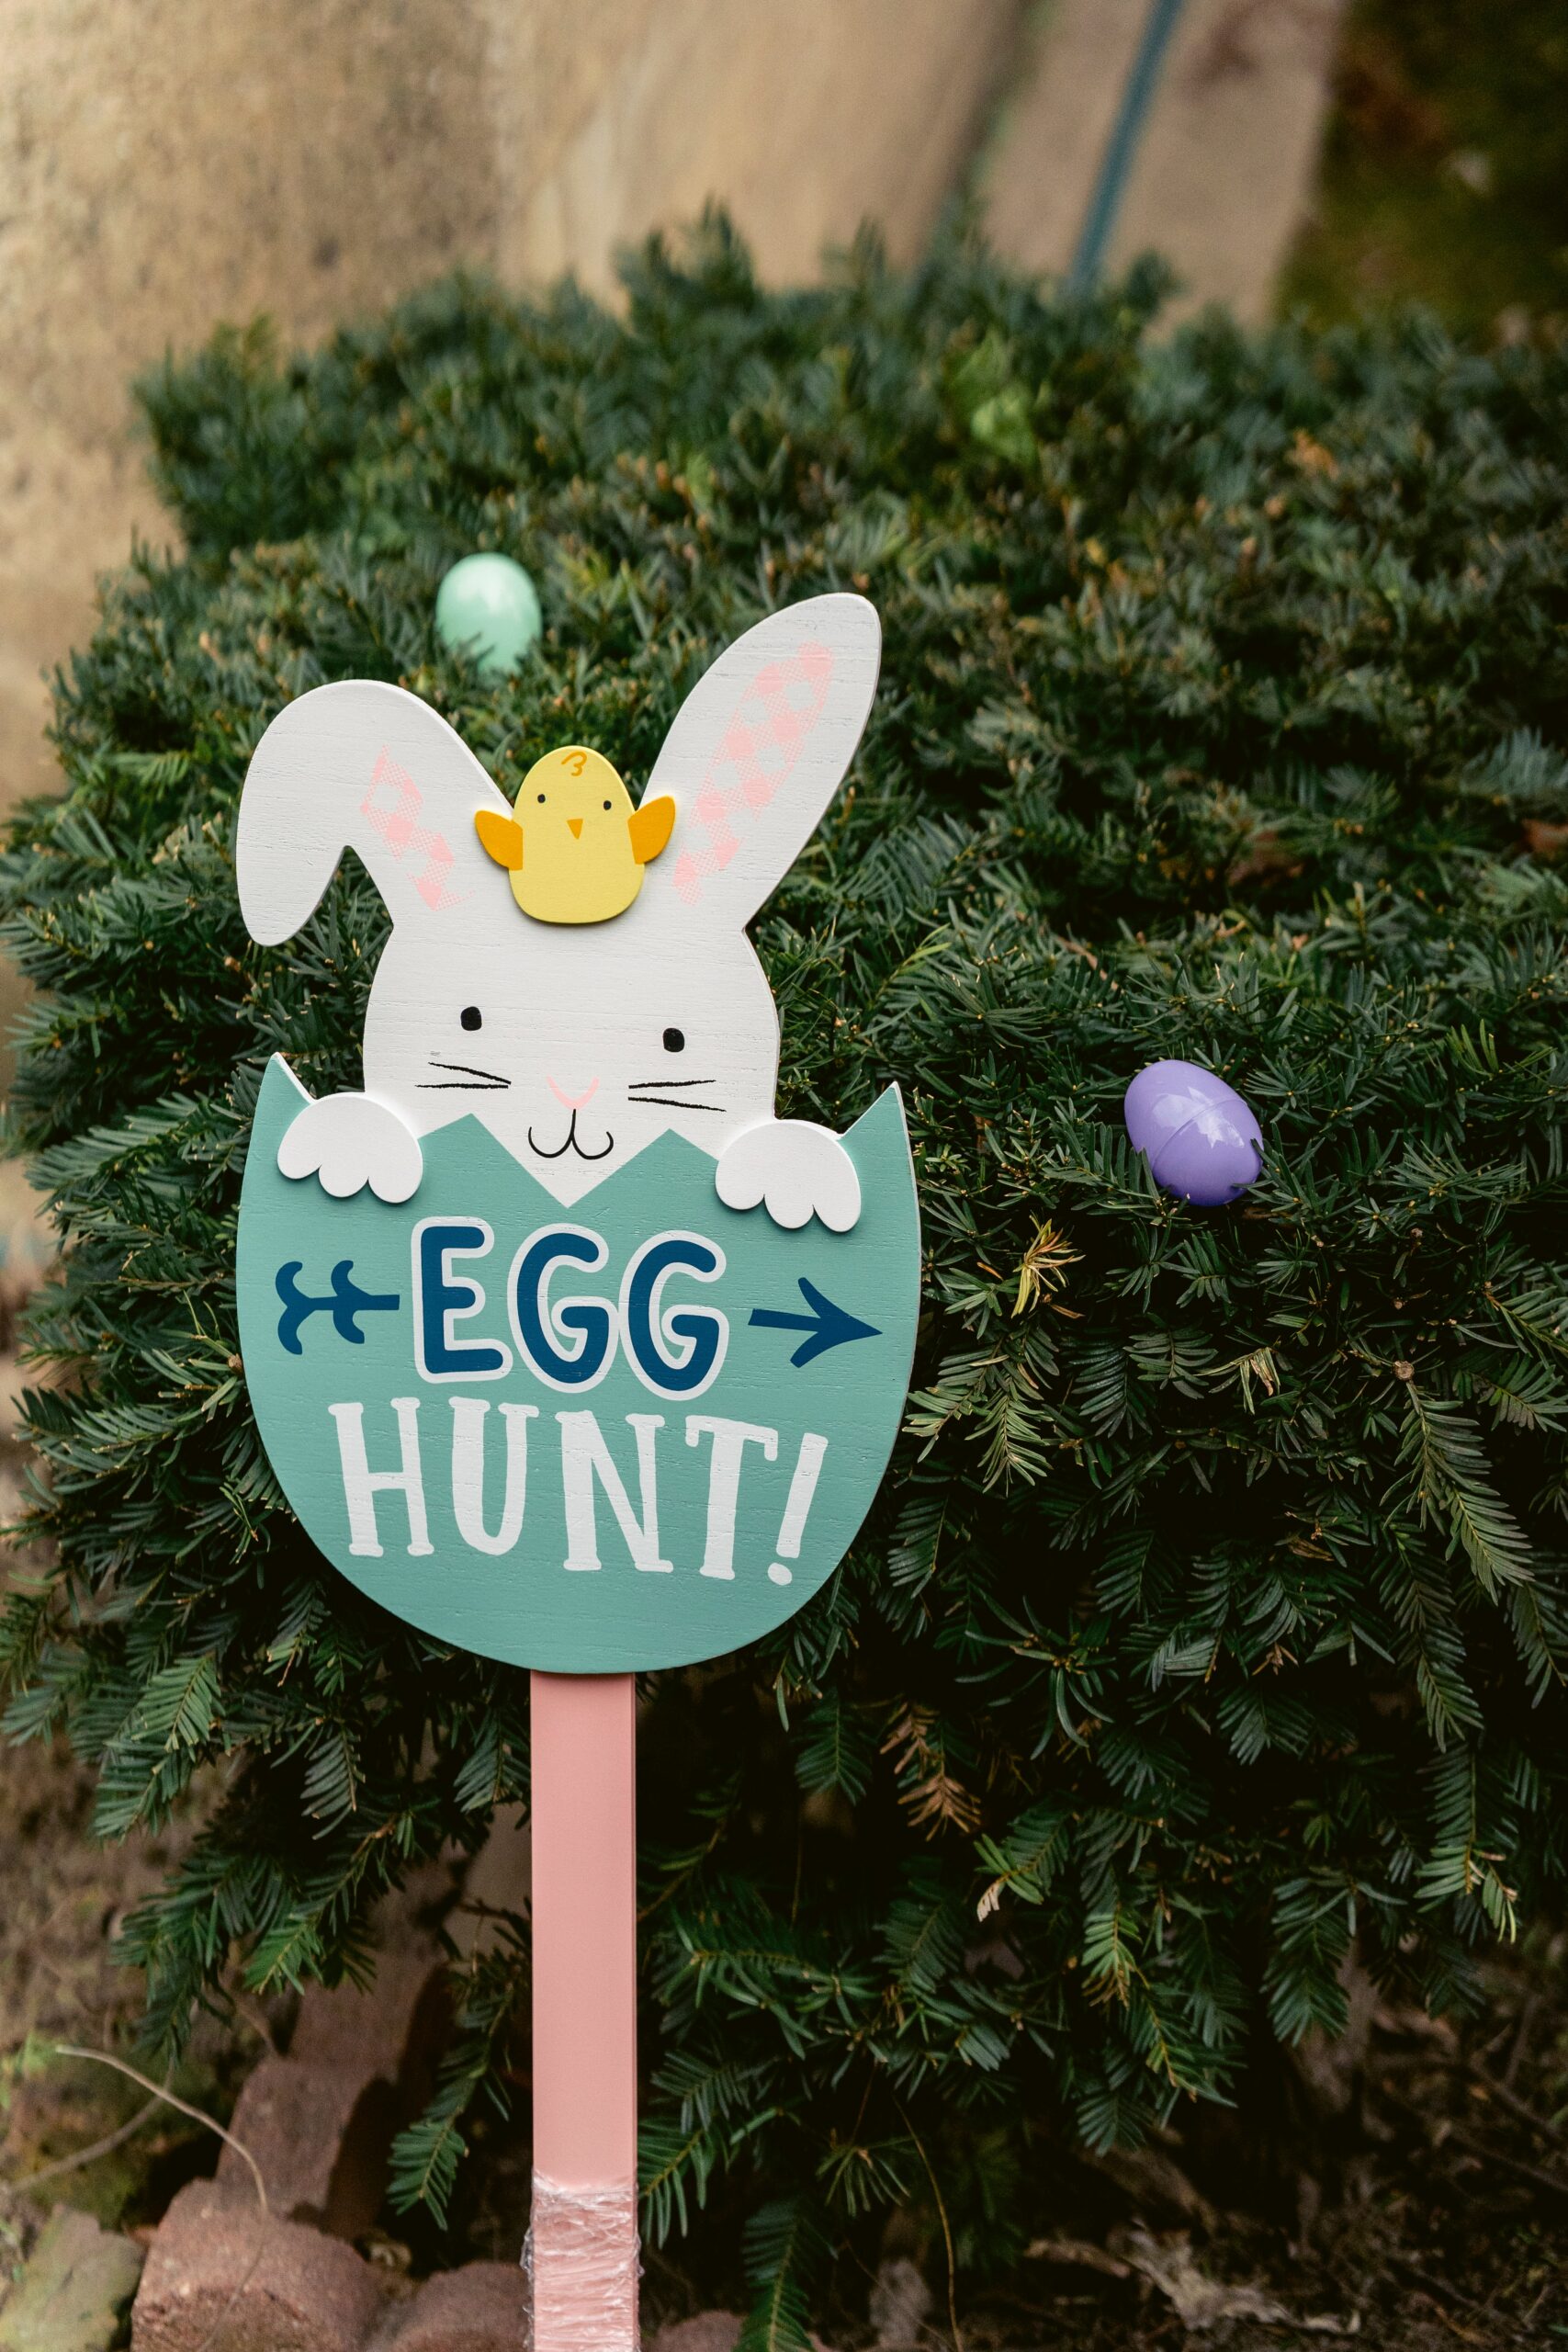 Egg-citing Easter Games